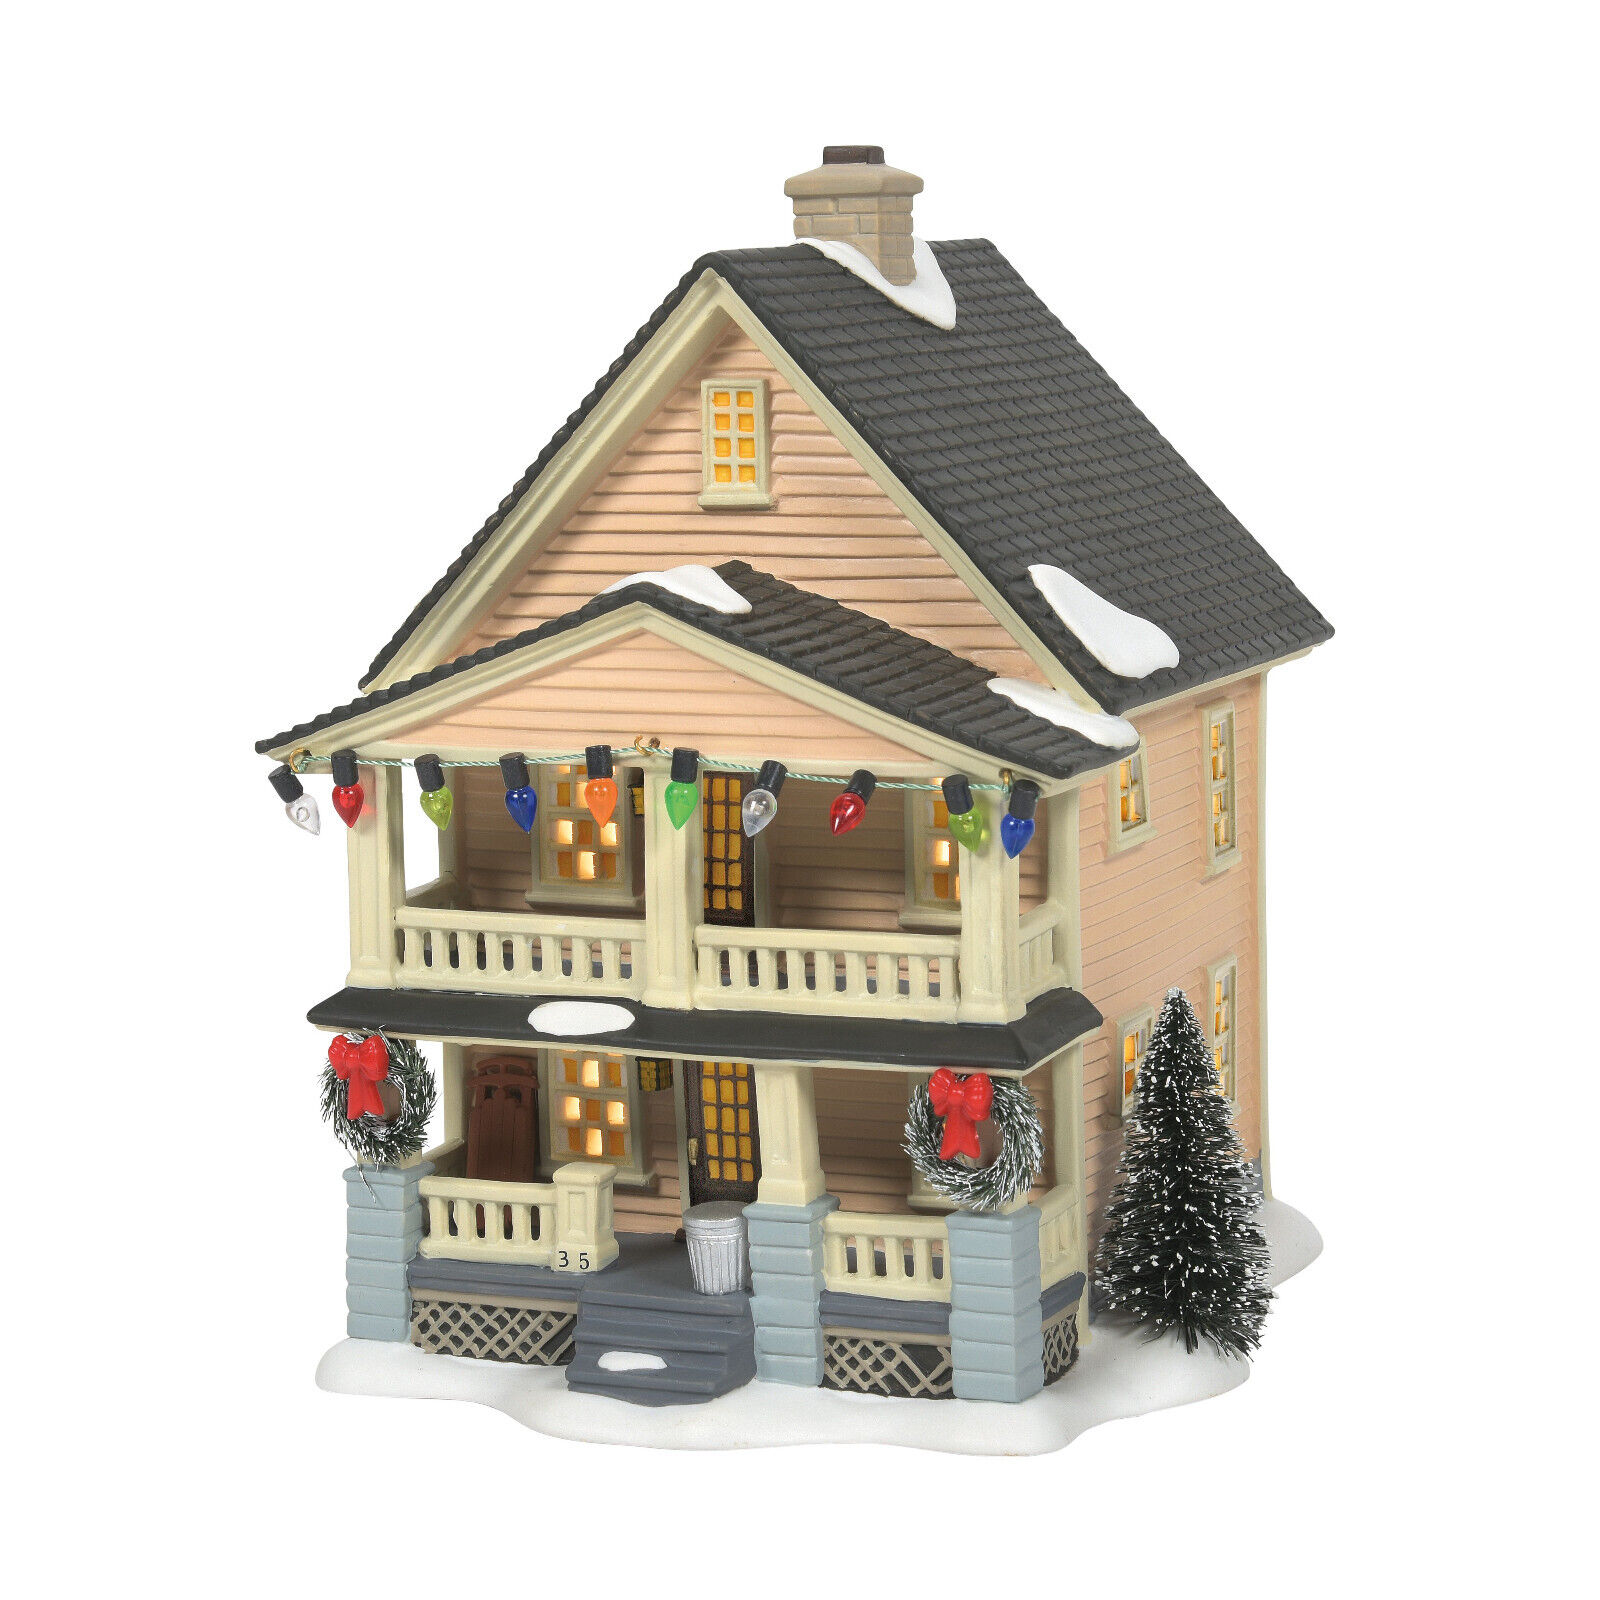 Dept 56 SCHWARTZ\'S HOUSE A Christmas Story Village 6009756 BRAND NEW IN BOX